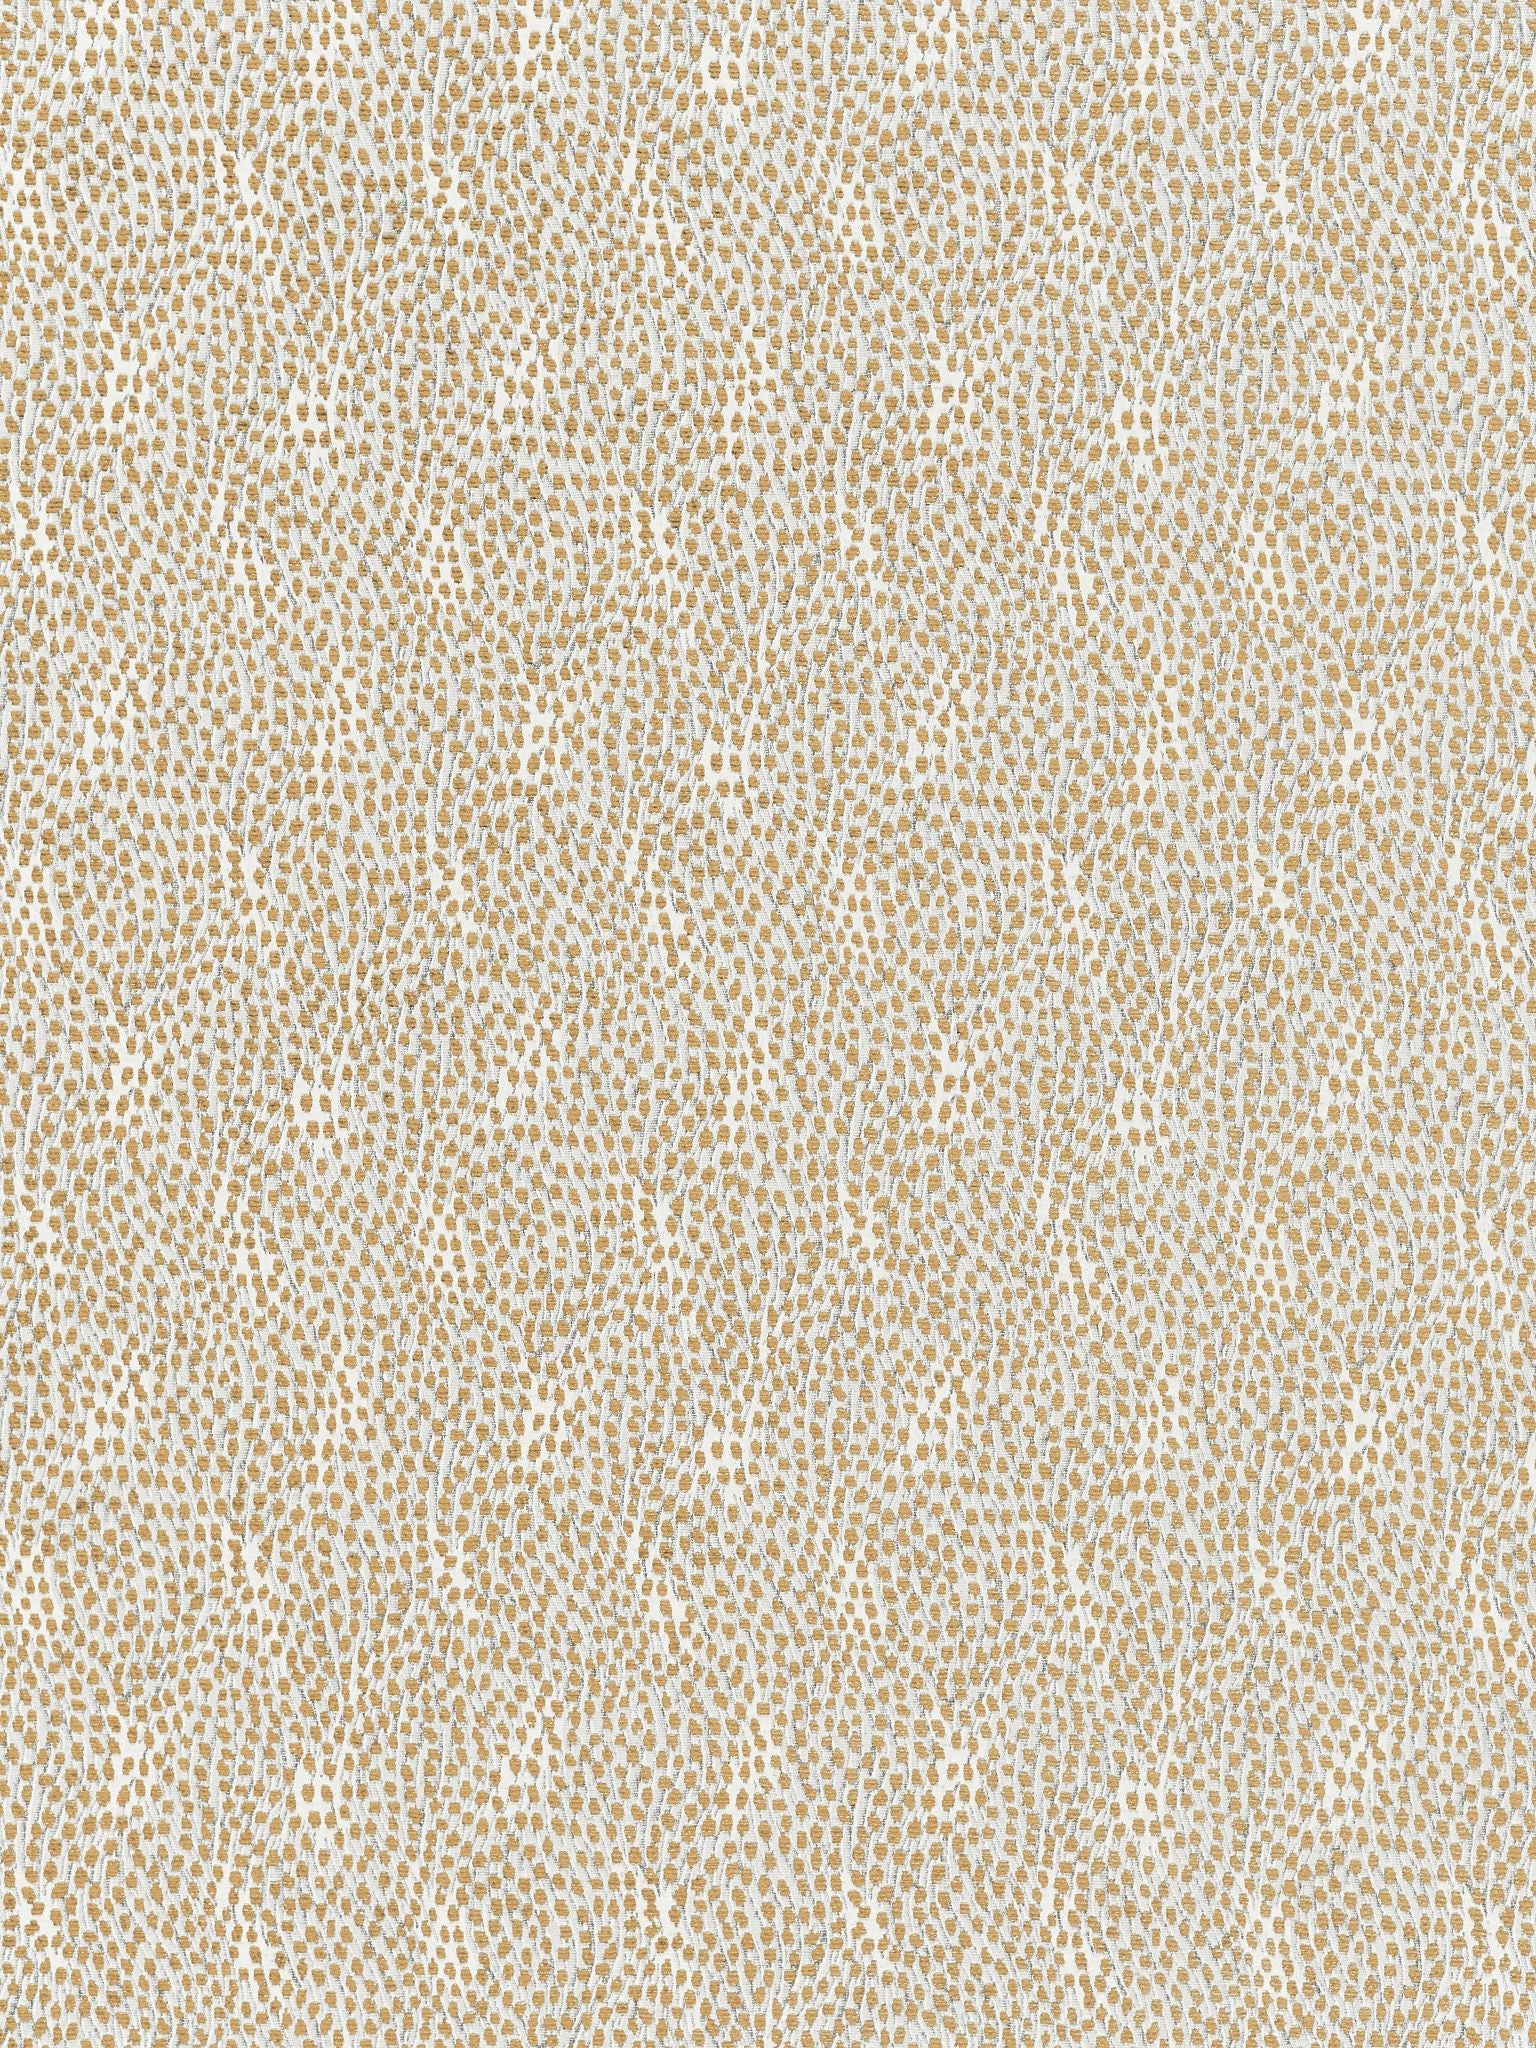 Flurry fabric in caribou color - pattern number BI 00011234 - by Scalamandre in the Old World Weavers collection